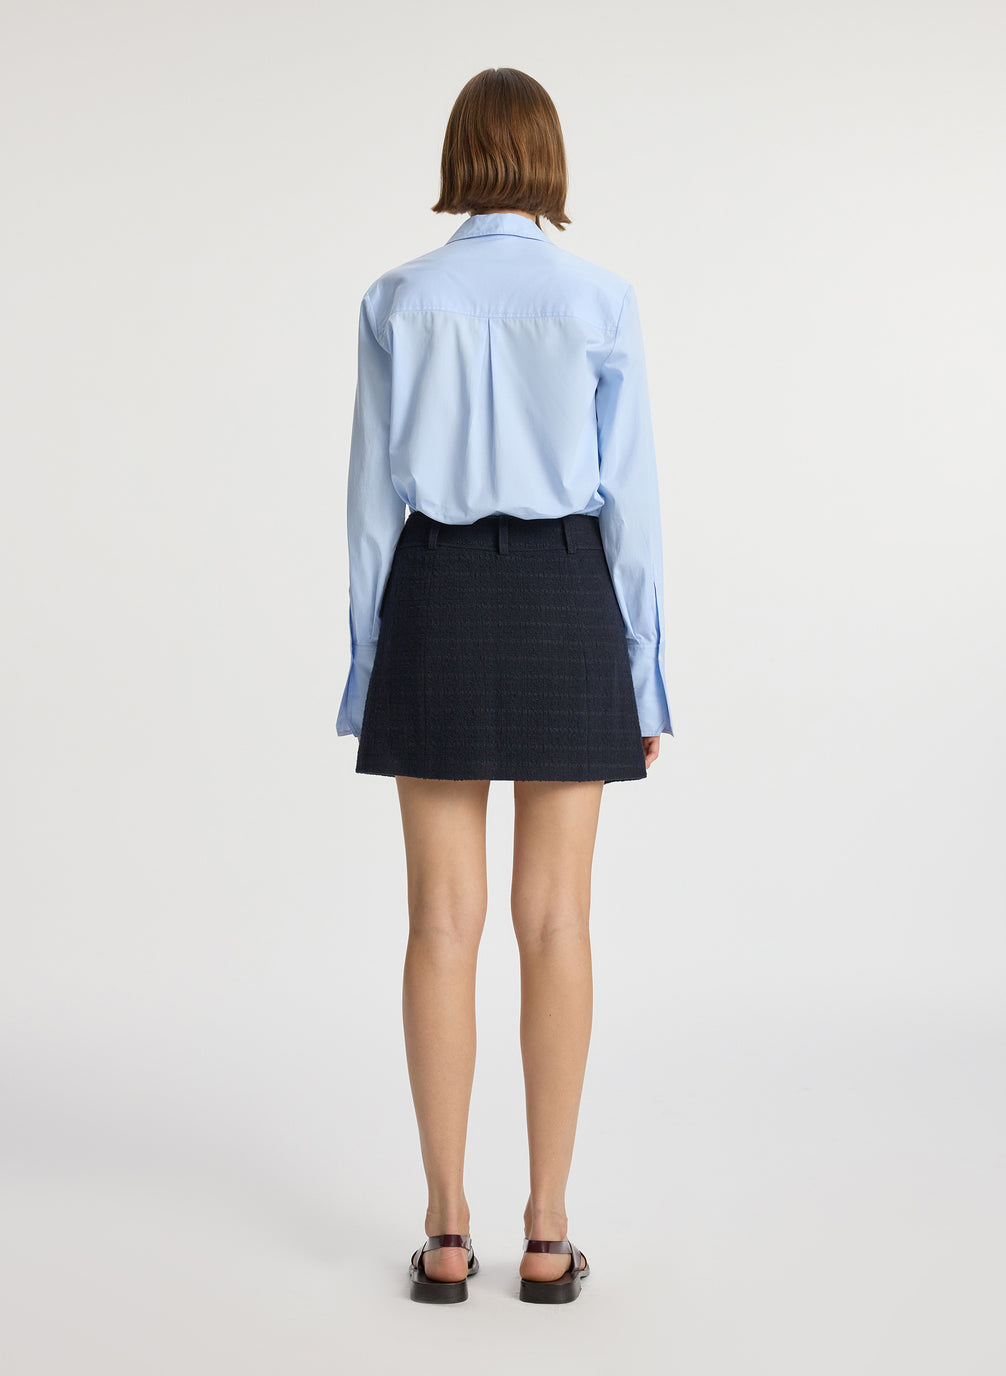 back view of woman wearing blue button down collared shirt and navy tweed mini wrap skirt 